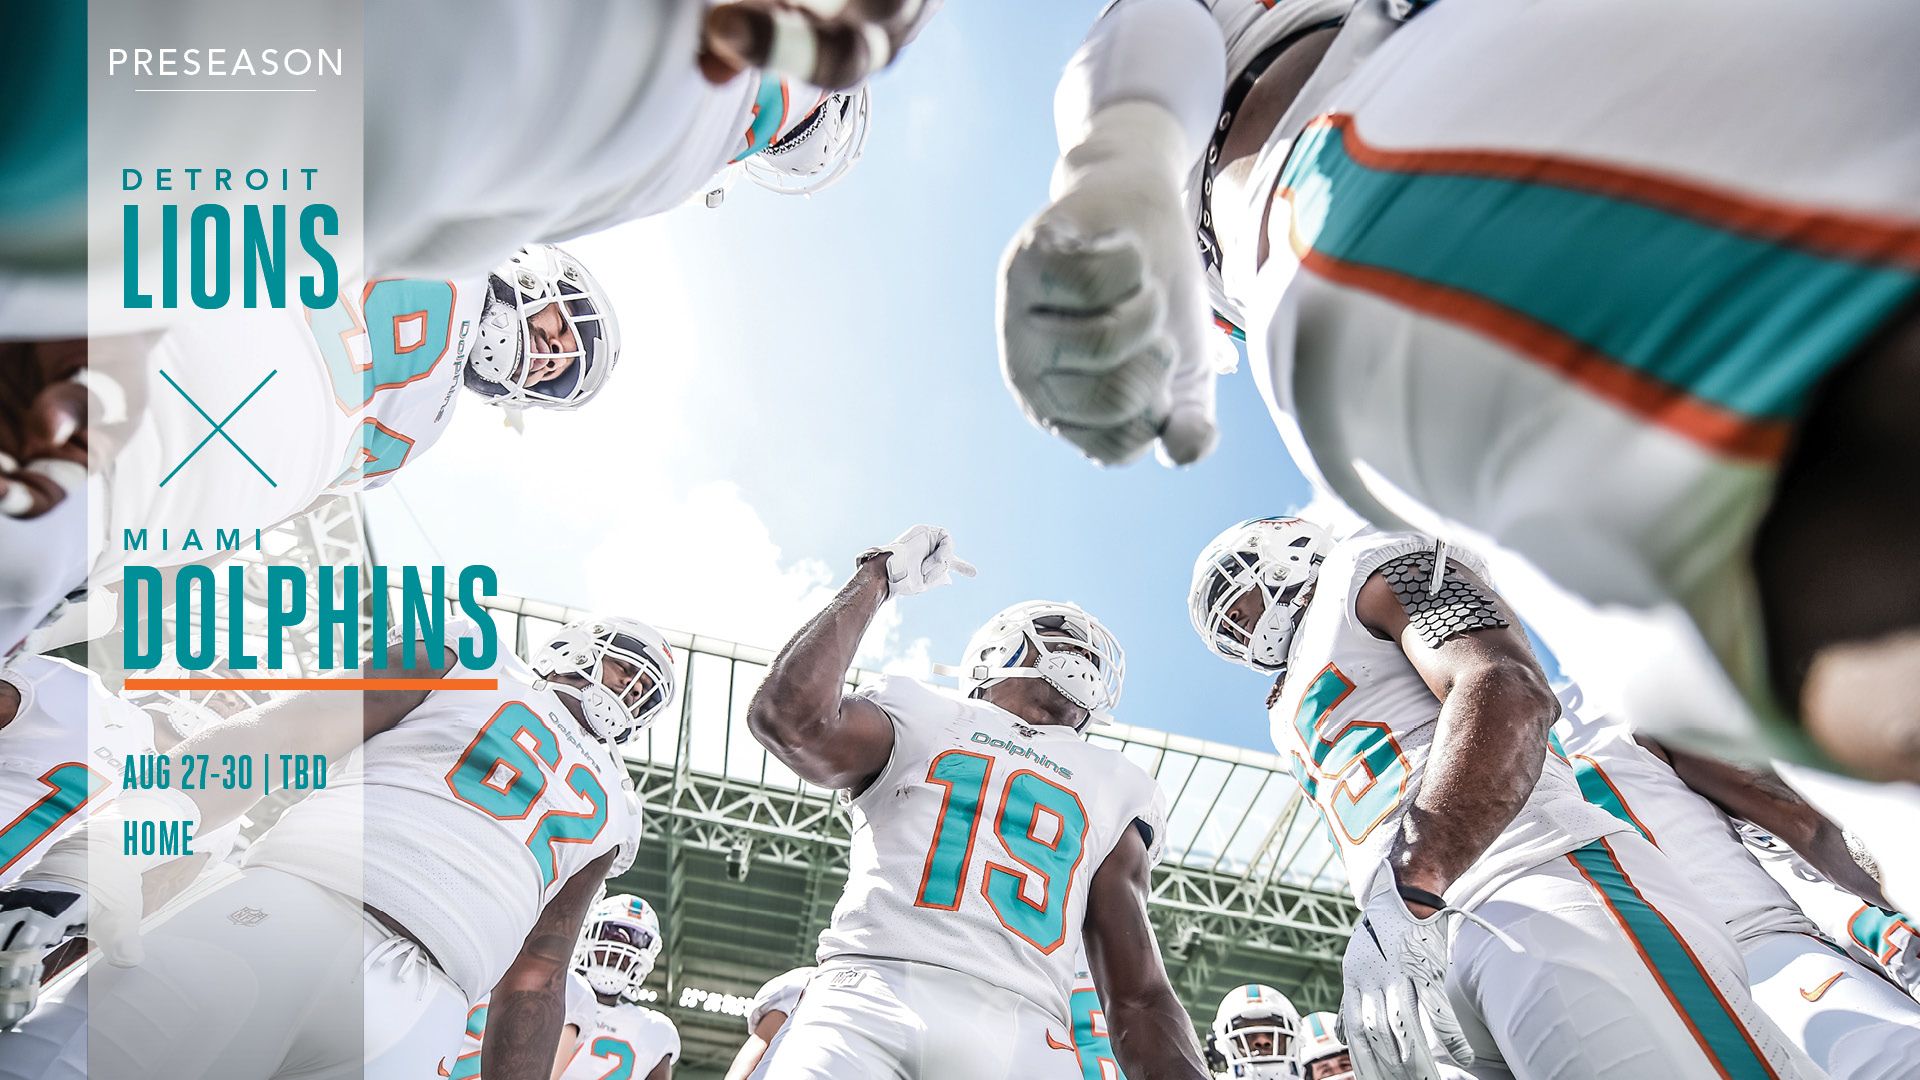 Dolphins Single Game Tickets | Miami Dolphins - dolphins.com